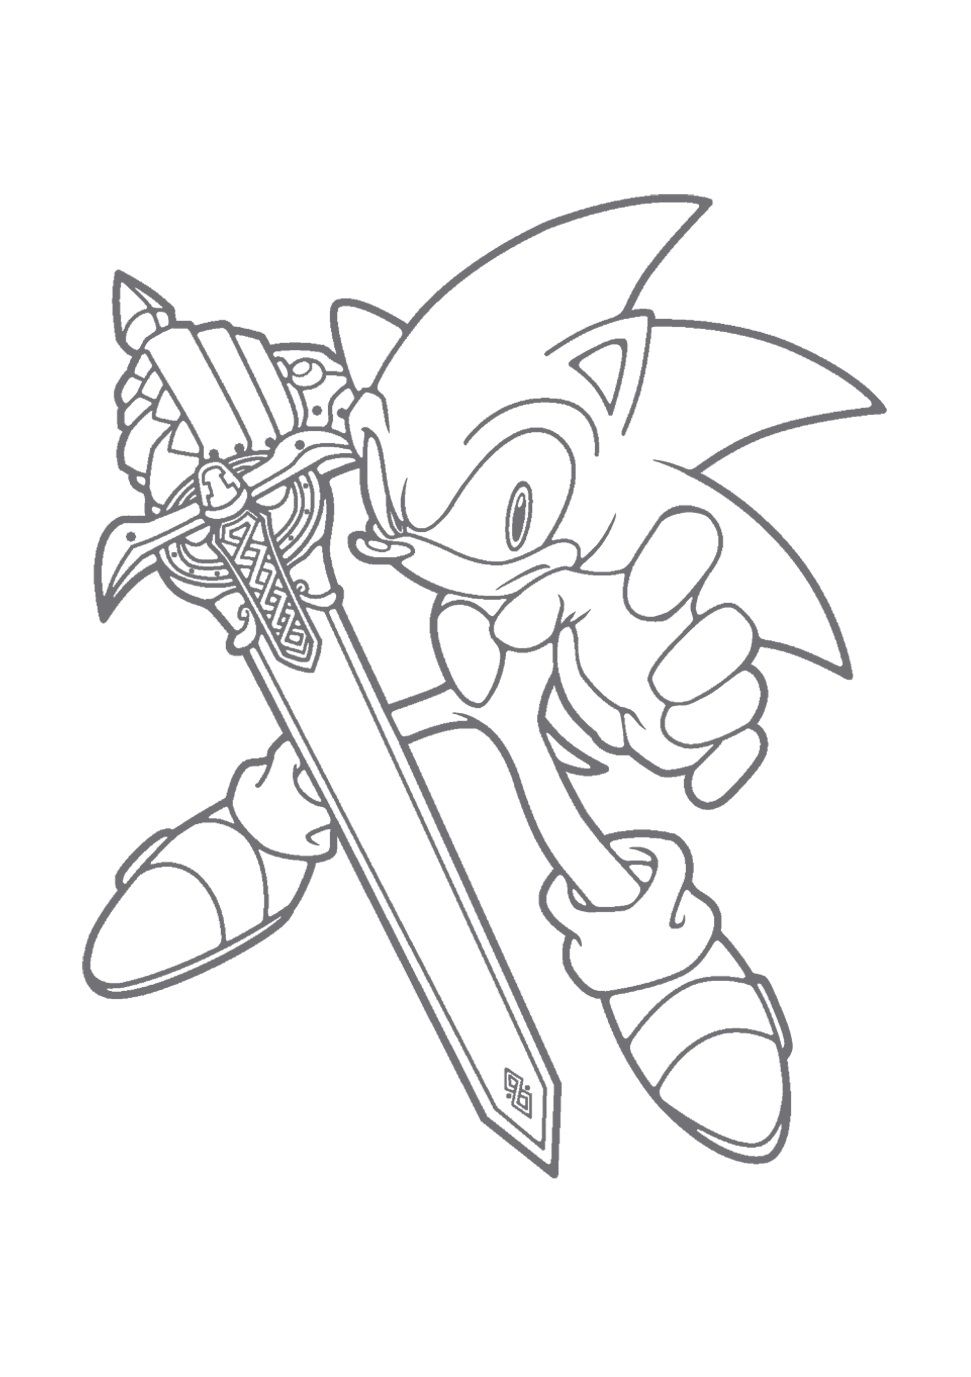 sonic and the black knight coloring pages